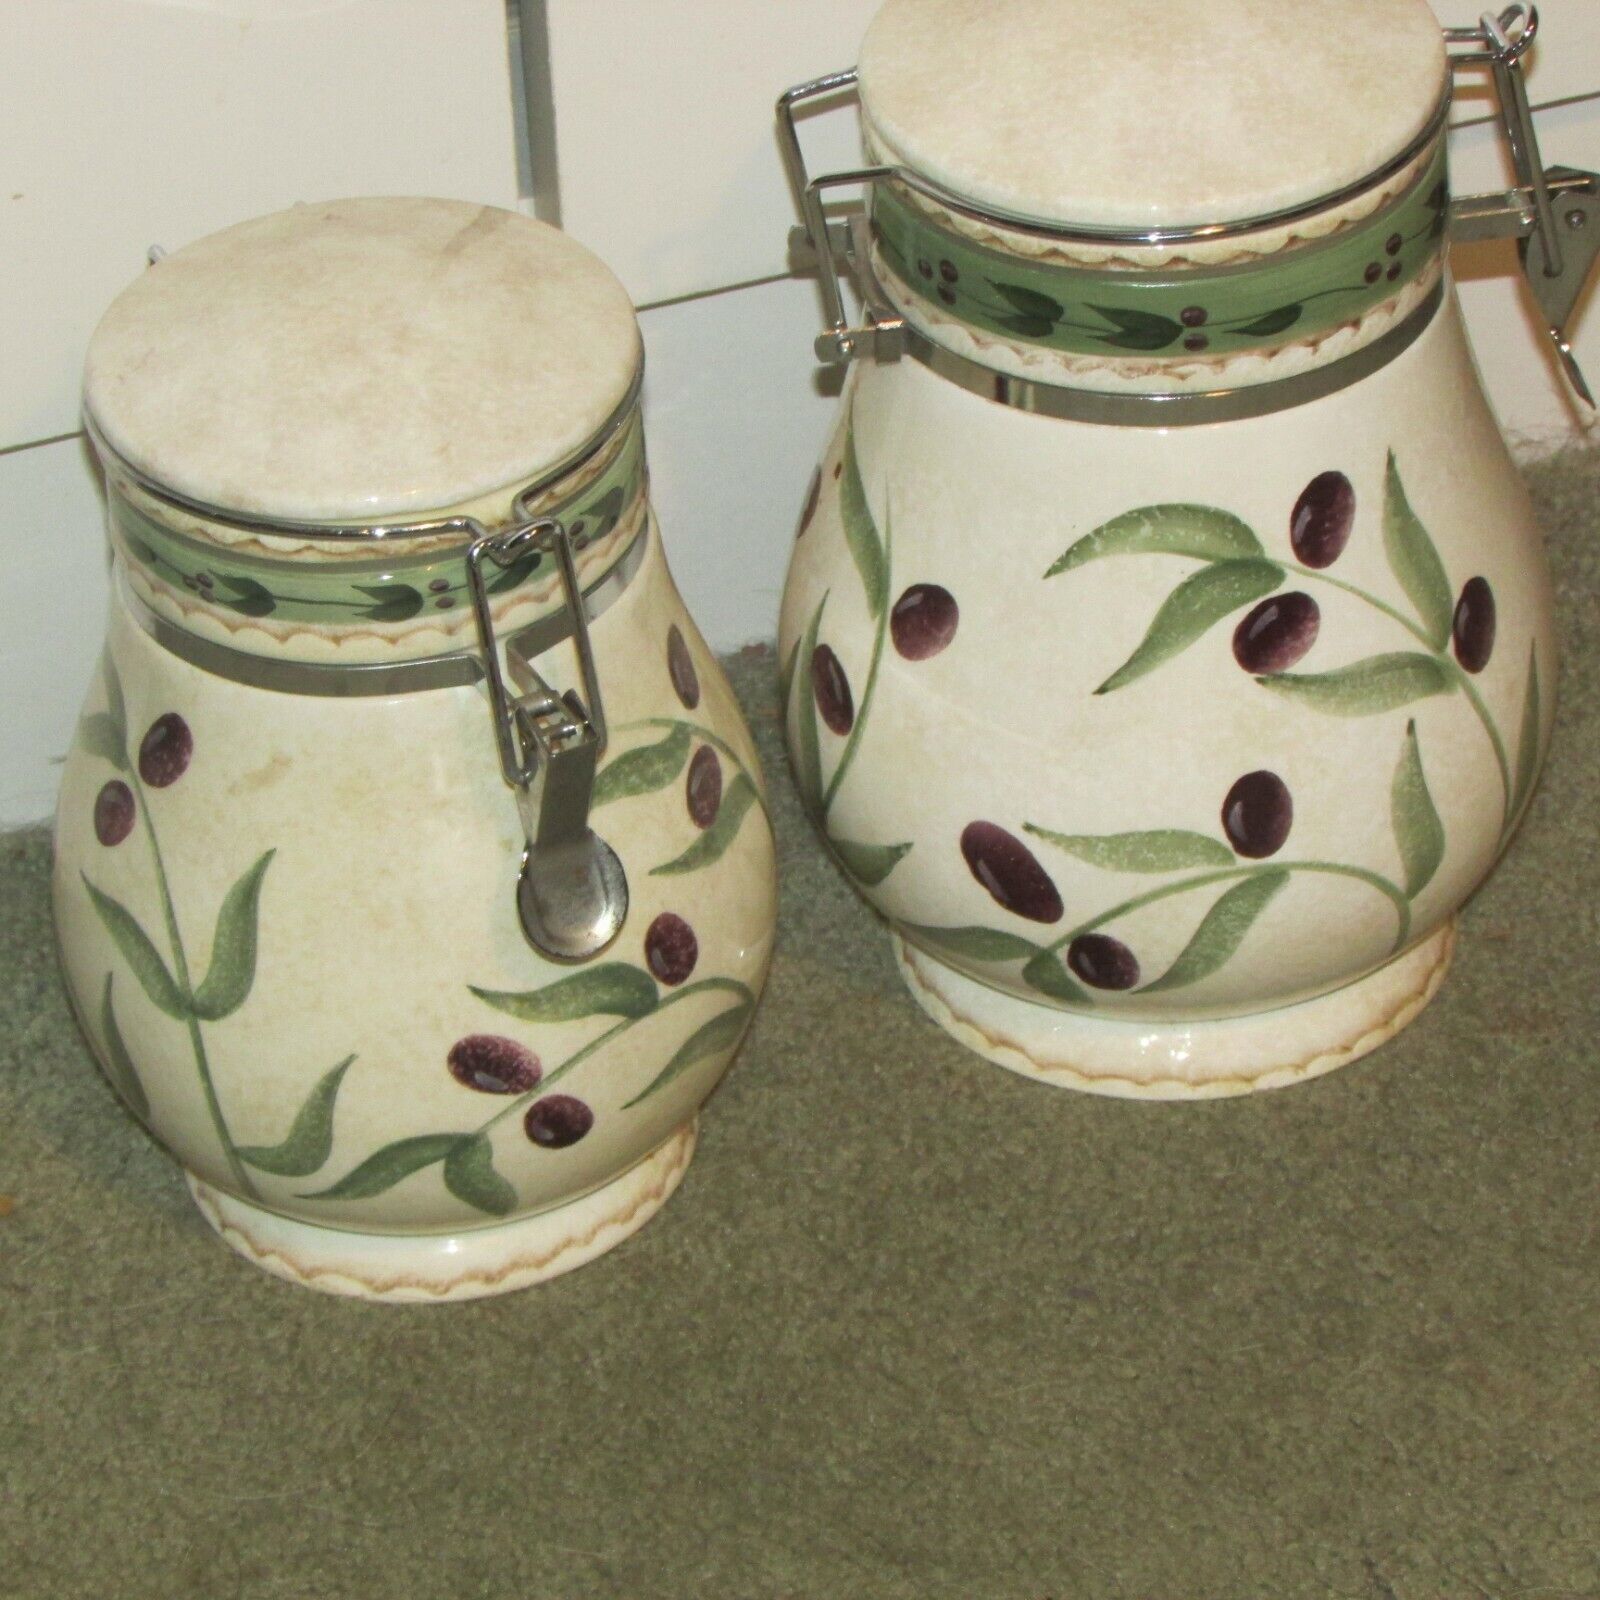 ONEIDA OLIVETO ceramic CANISTERS, one 8" one 9" tall (hall) - $49.50